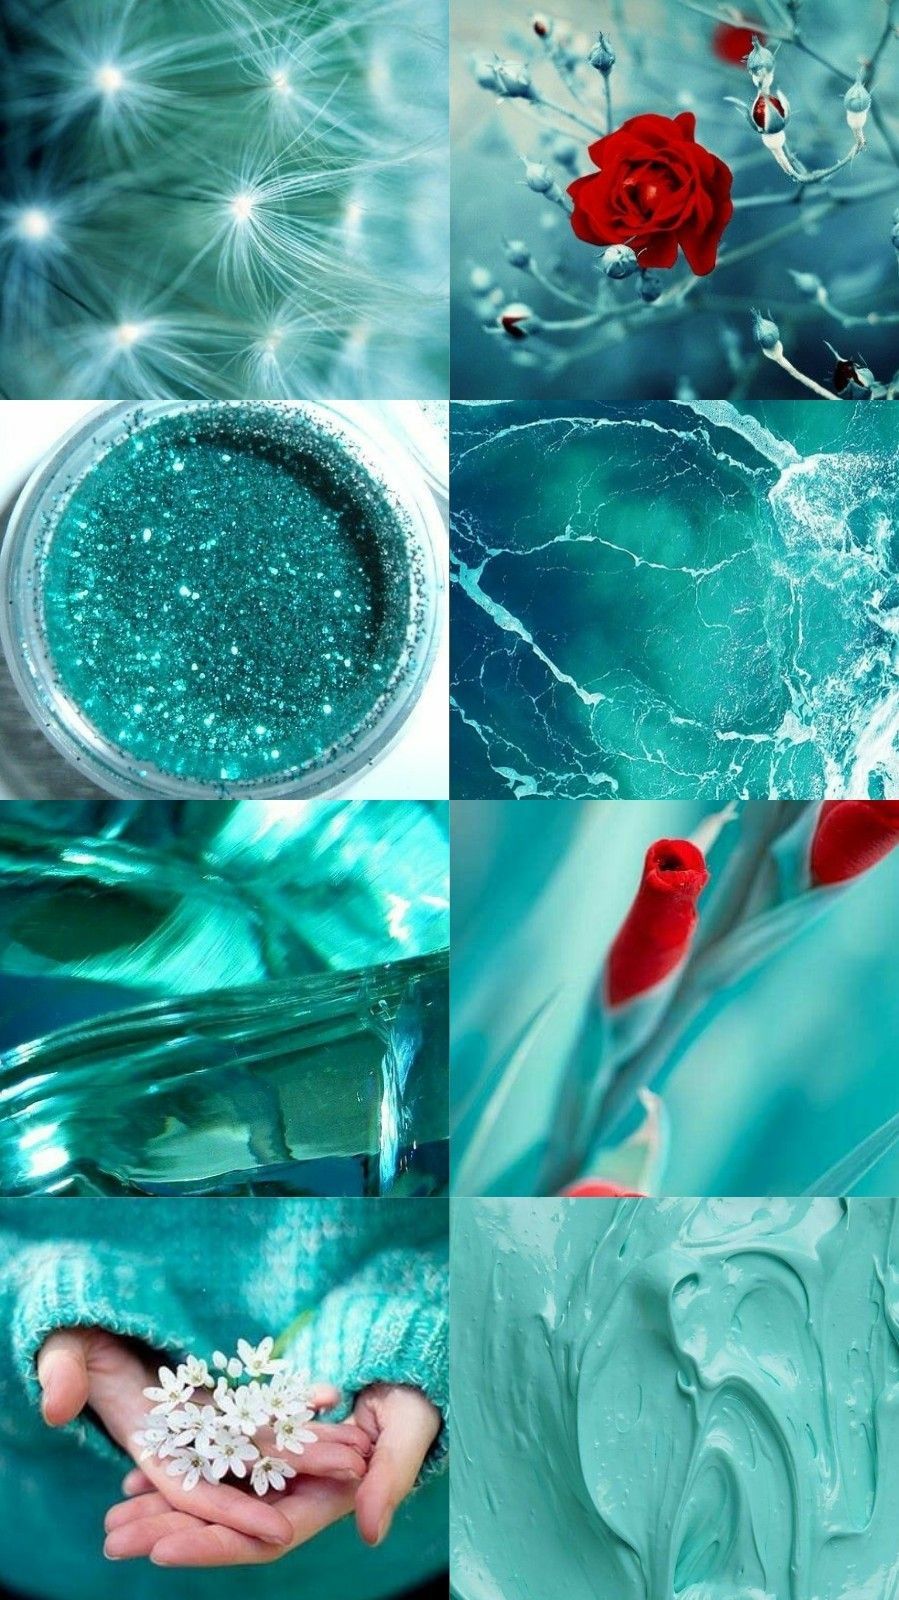 Aesthetic background of blue, red, and white images. - Cyan